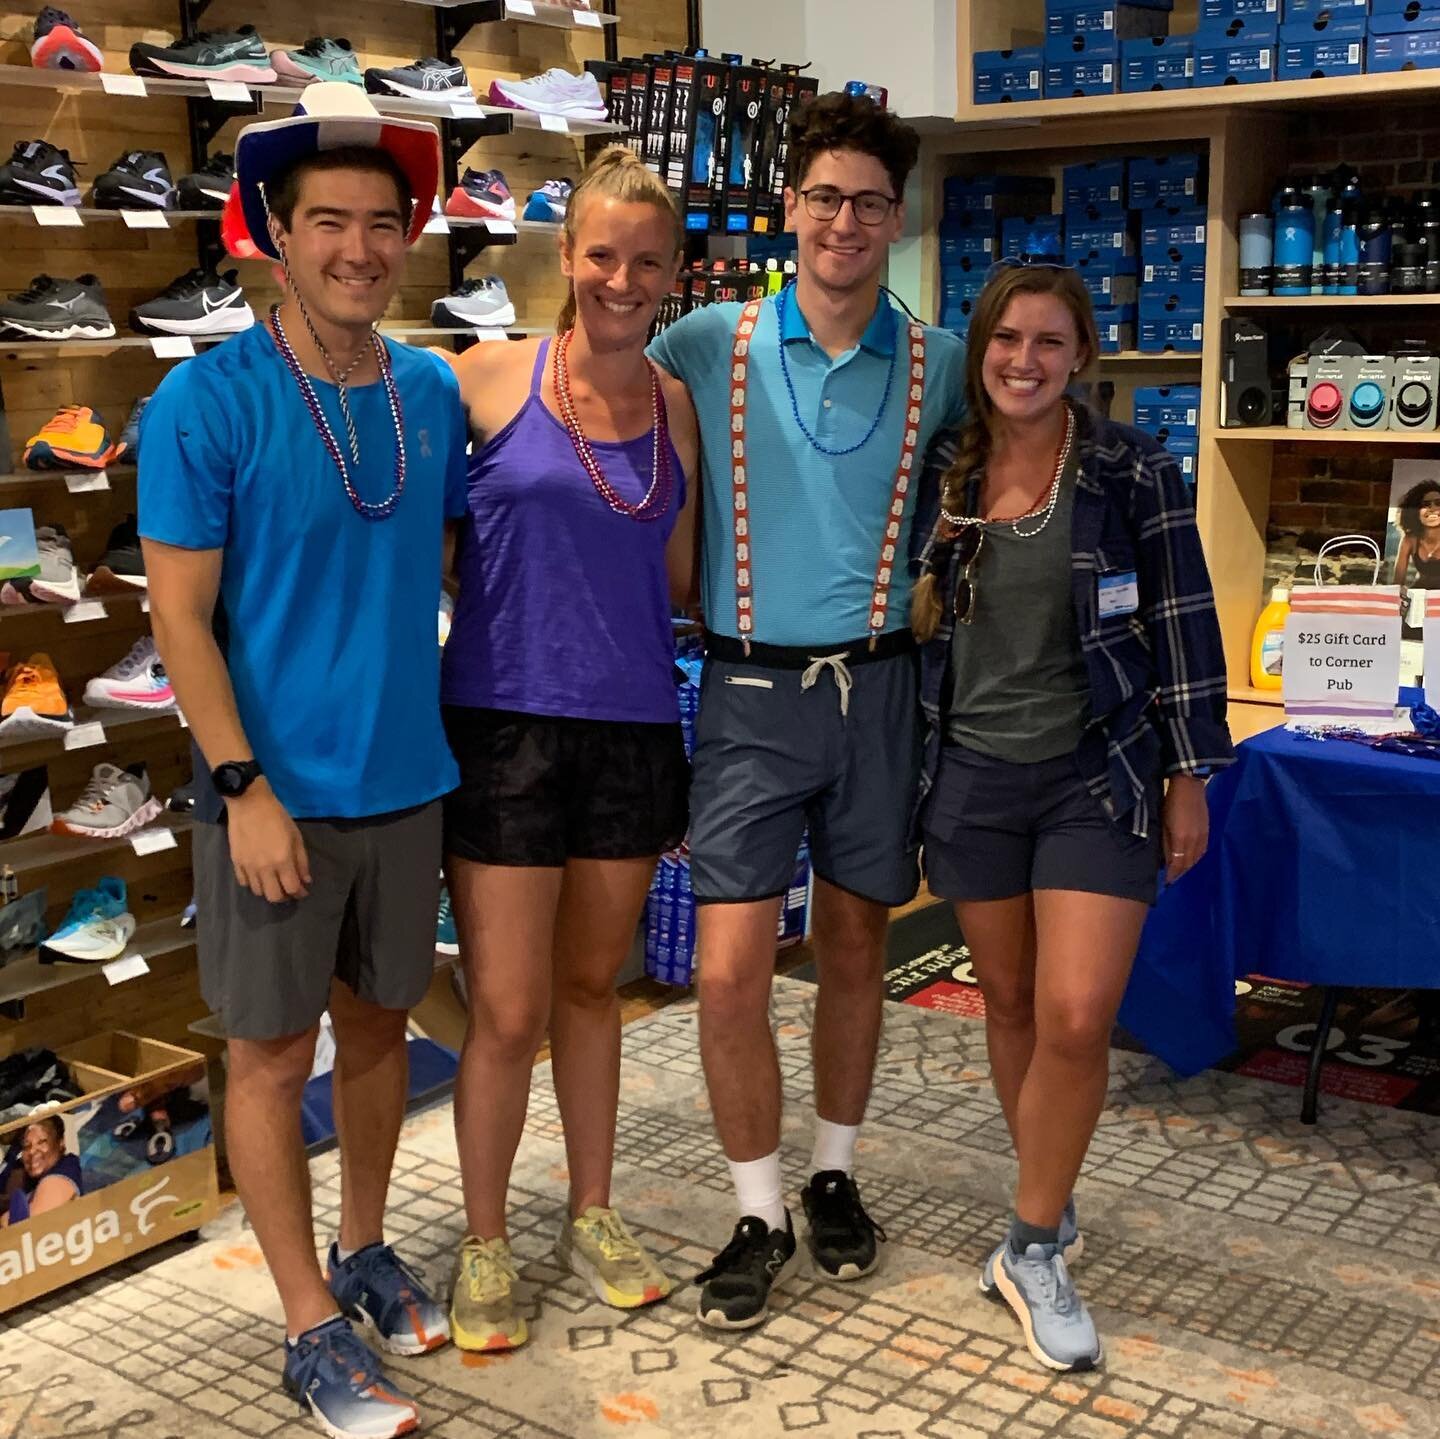 😊 Thank you to everyone who came to Run Club last night to support Nicole&rsquo;s Chicago Marathon fundraising efforts for the nonprofit Bottom Line!

🙏 A big thank you for the donations from: @runnersalley, @goatbarnh, @stonewallkitchen, and @corn